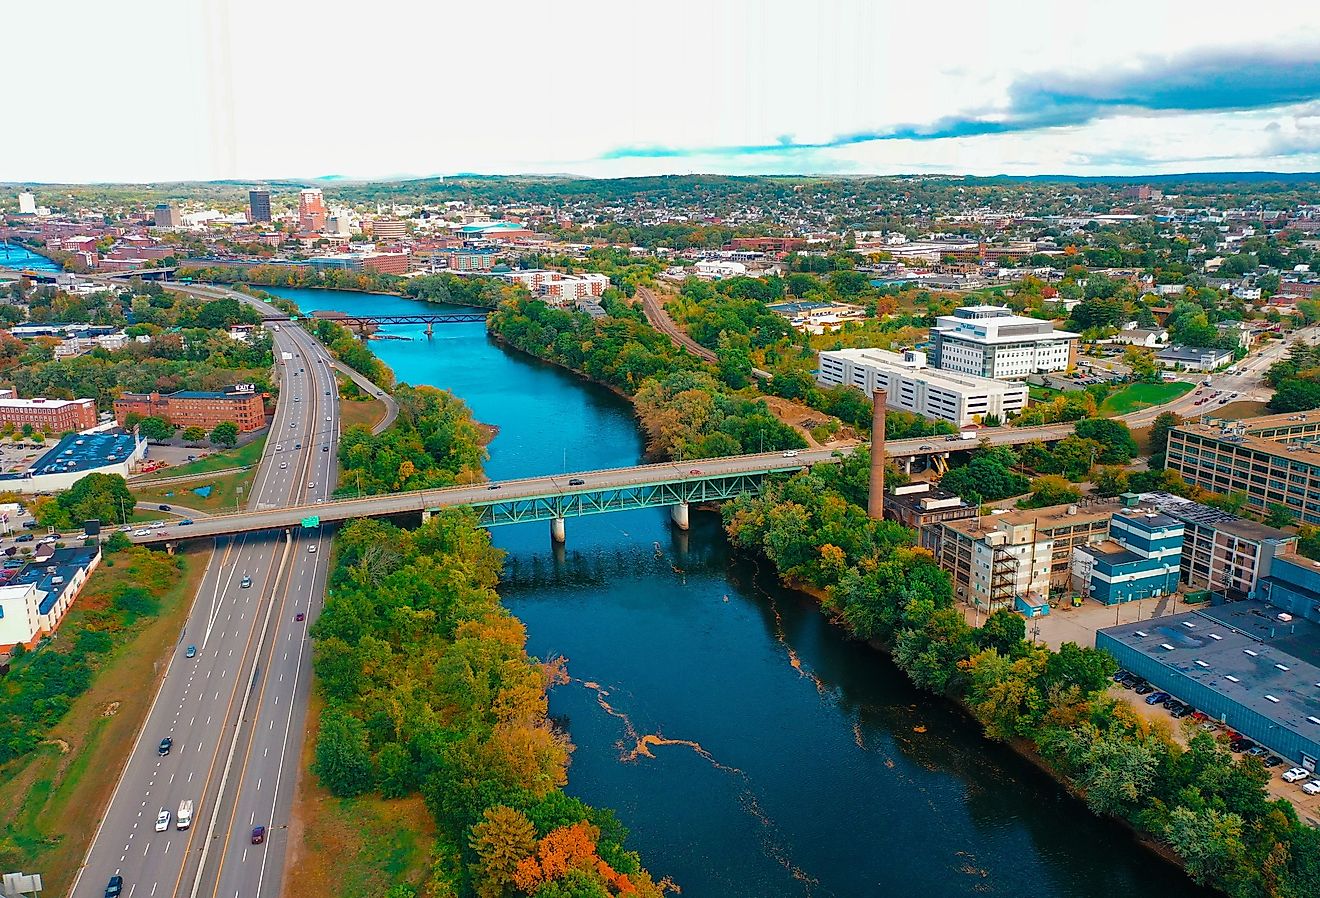 Aerial drone photo of Downtown Manchester, New Hampshire during autumn. Image credit Loud Canvas Media via AdobeStock.